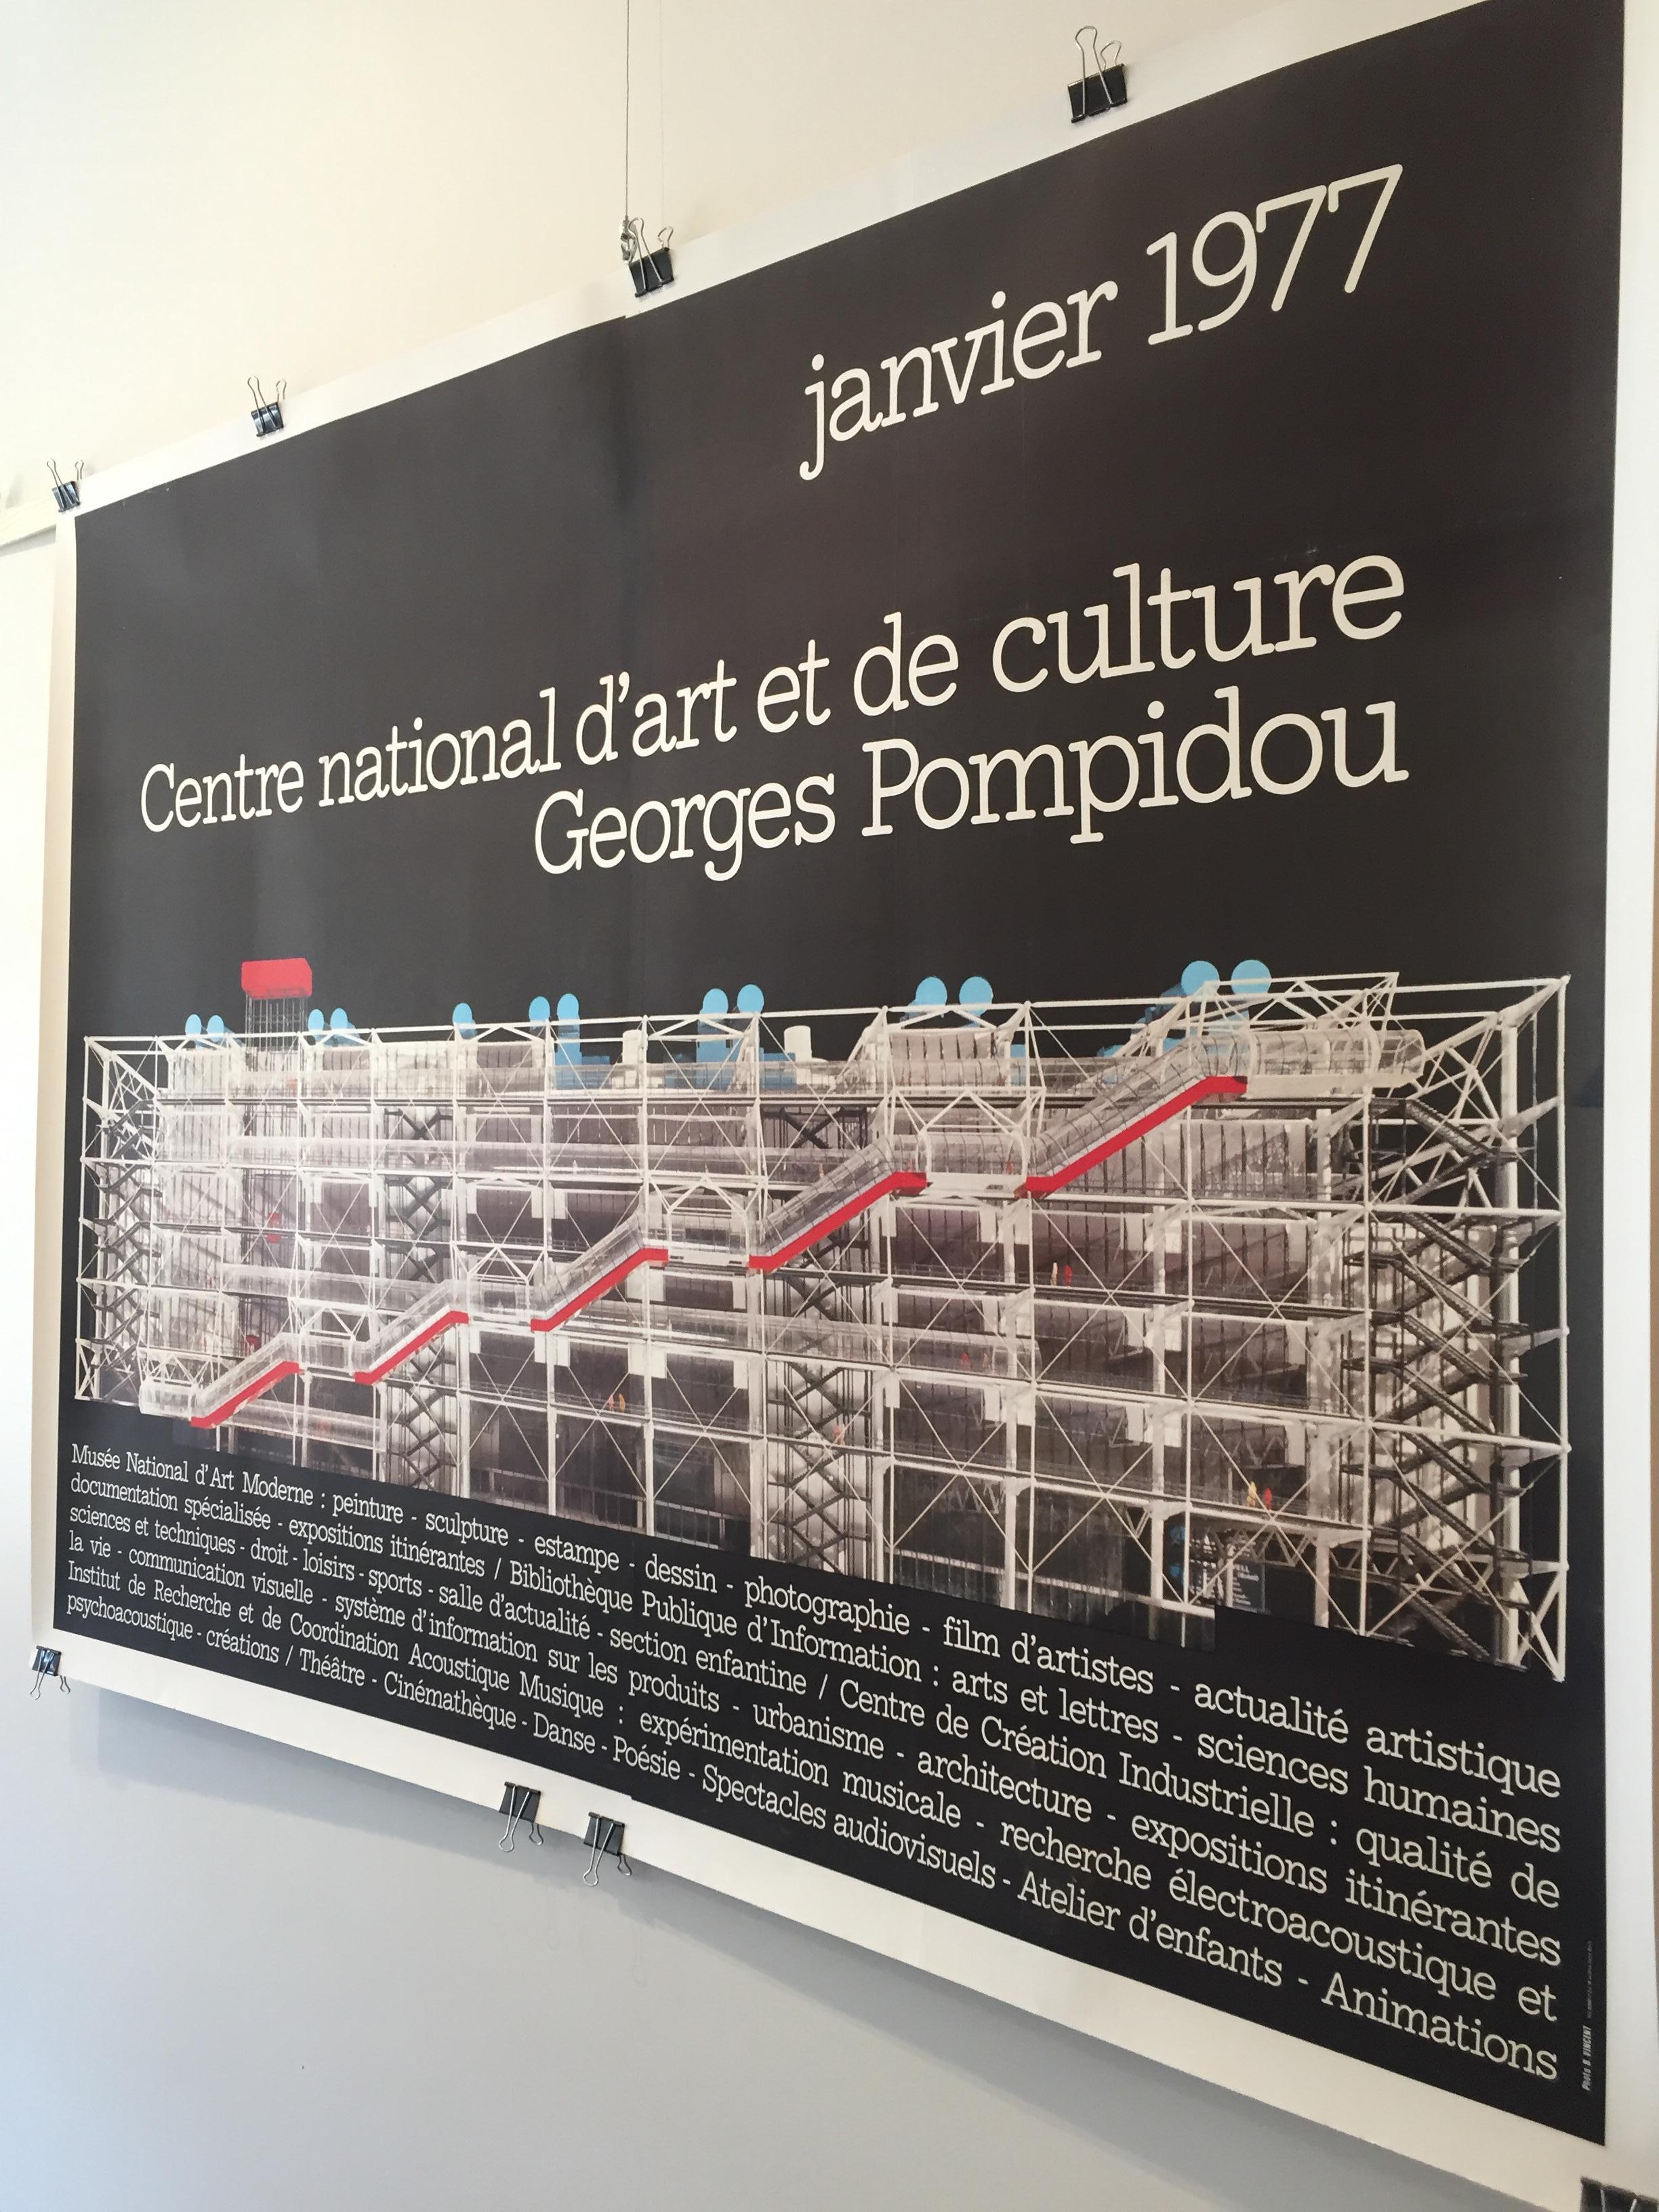 French Original Vintage Architectural Poster 'Georges Pompidou', Modern Art Museum 1977 For Sale